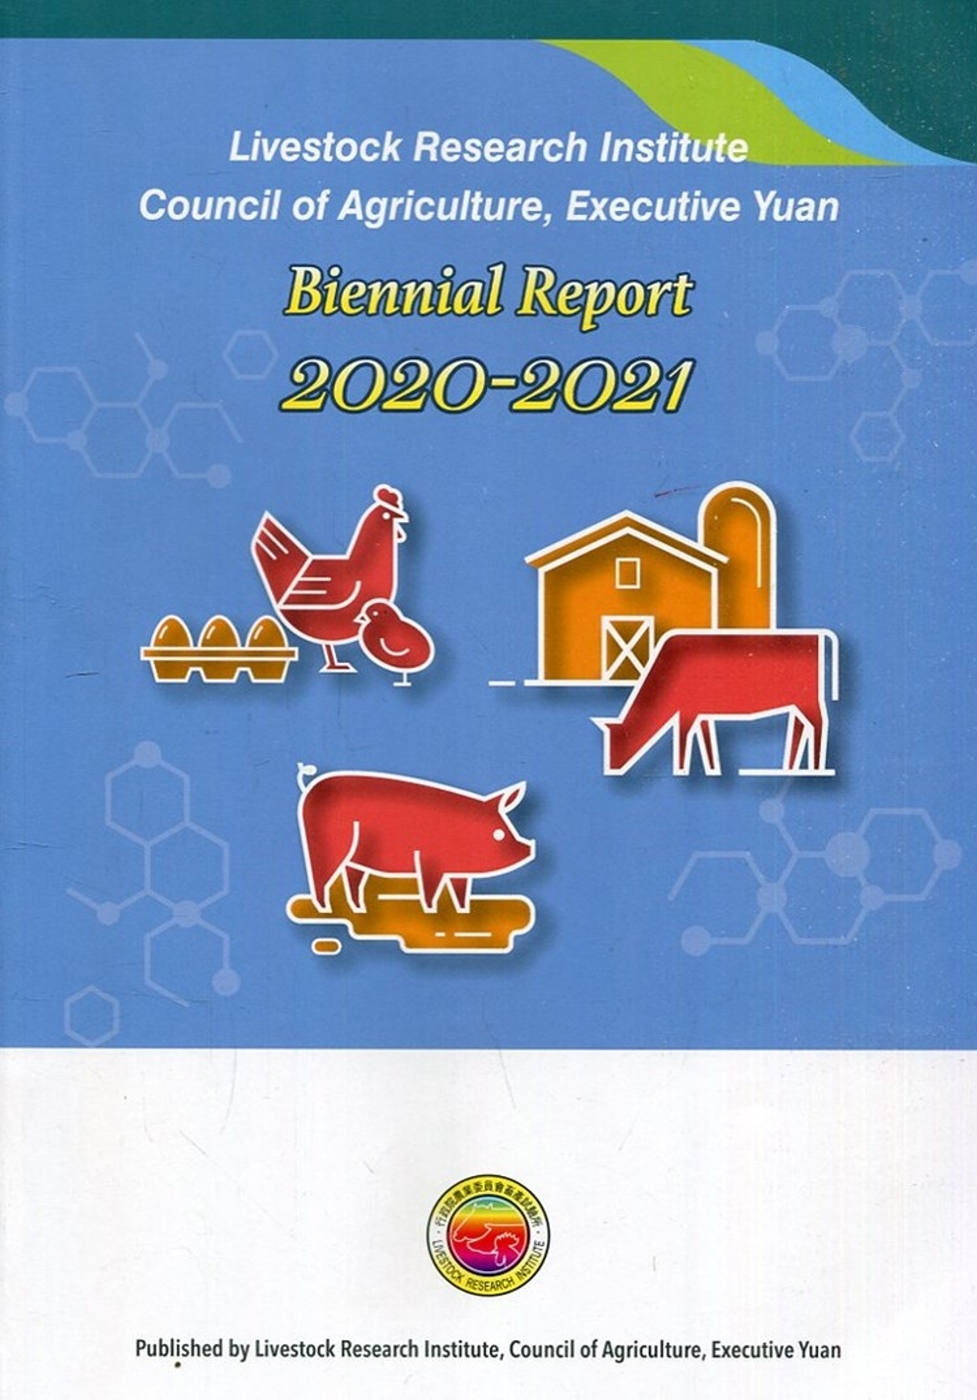 Livestock Research Institute, Council of Agriculture, Executive Yuan, Biennial Report 2020-2021